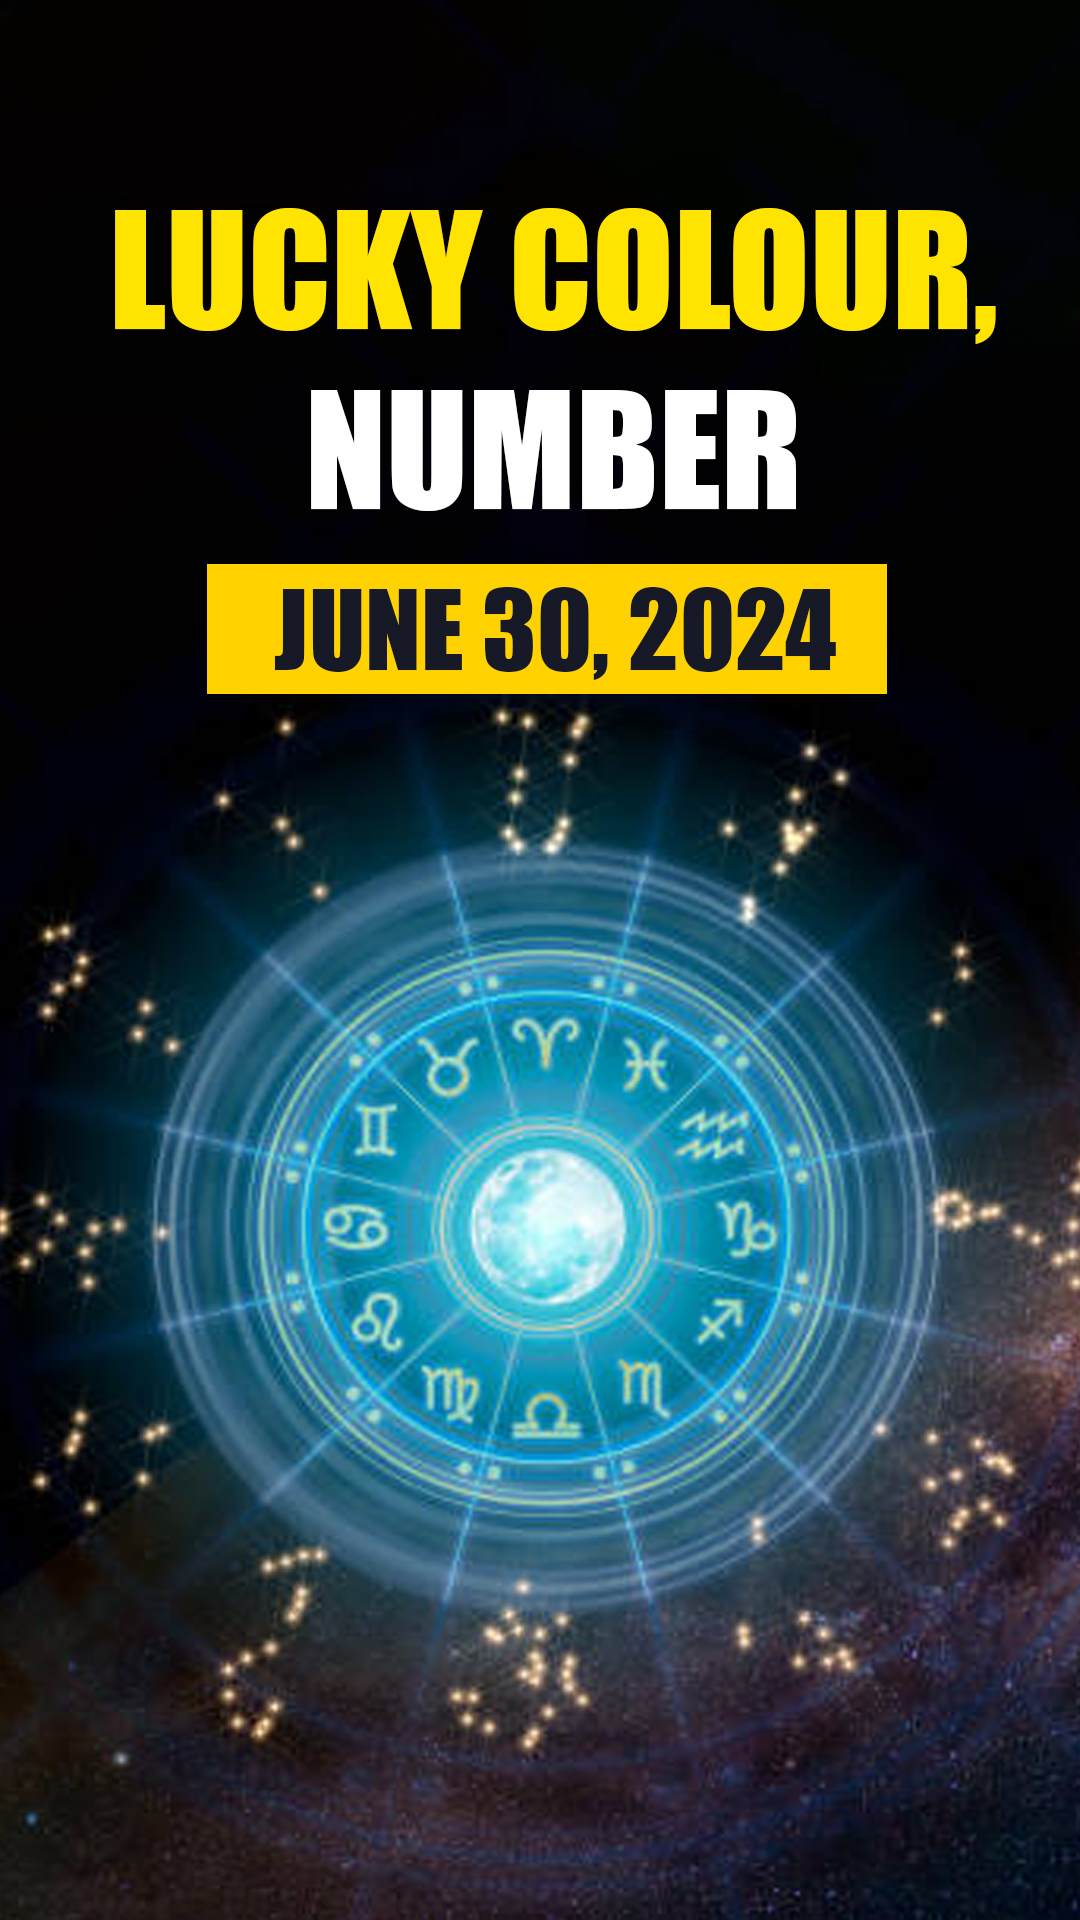 Know lucky colour, number of all zodiac signs in horoscope for June 30, 2024